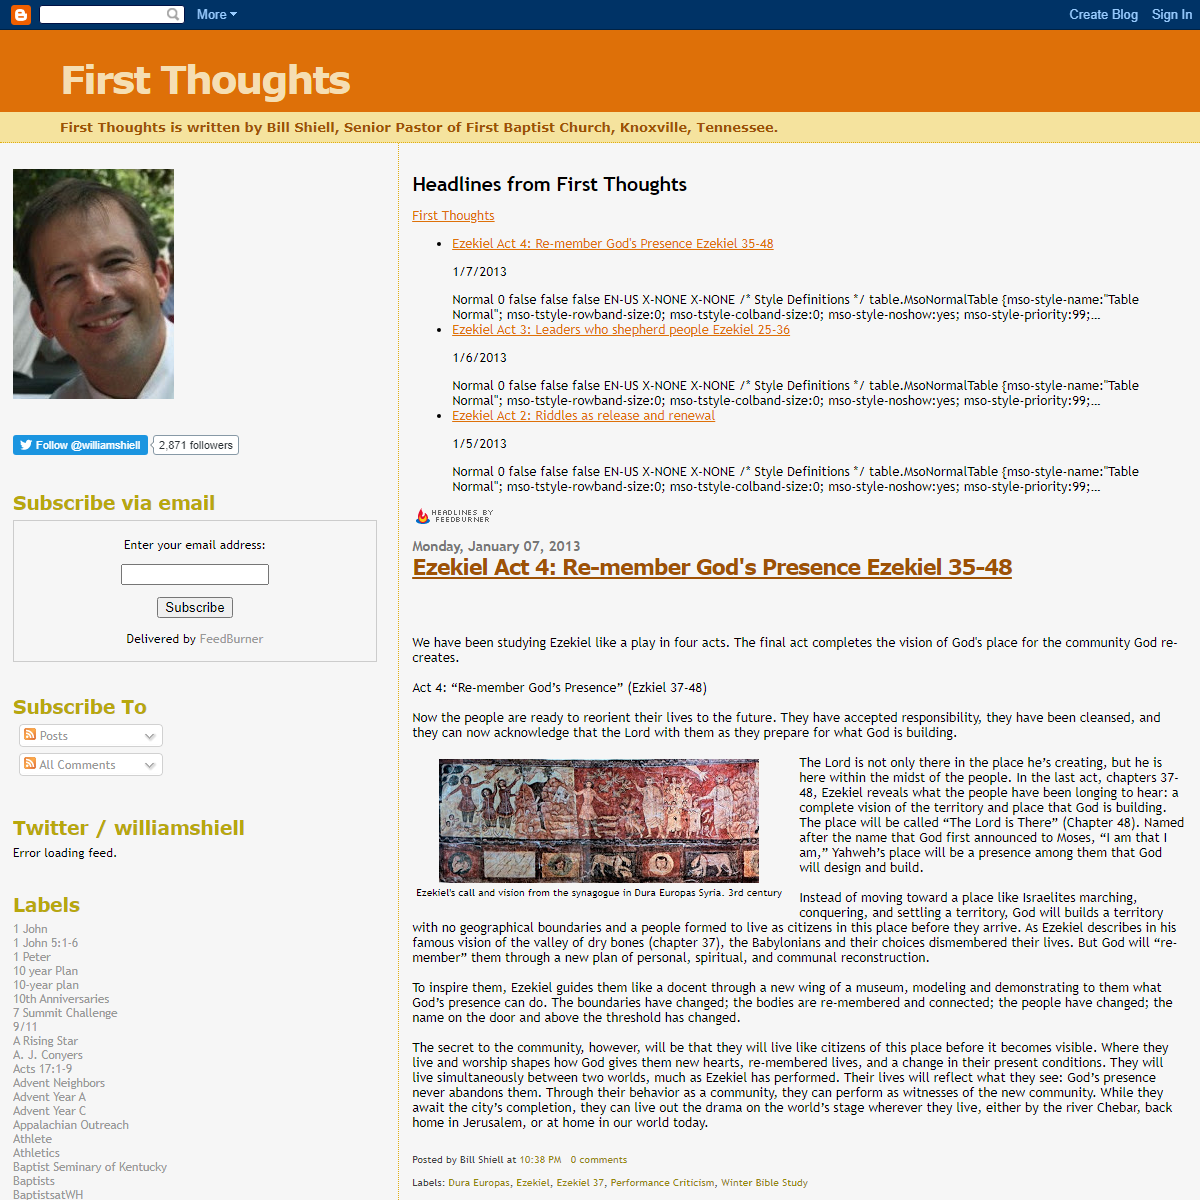 A complete backup of https://firsthoughts.blogspot.com/